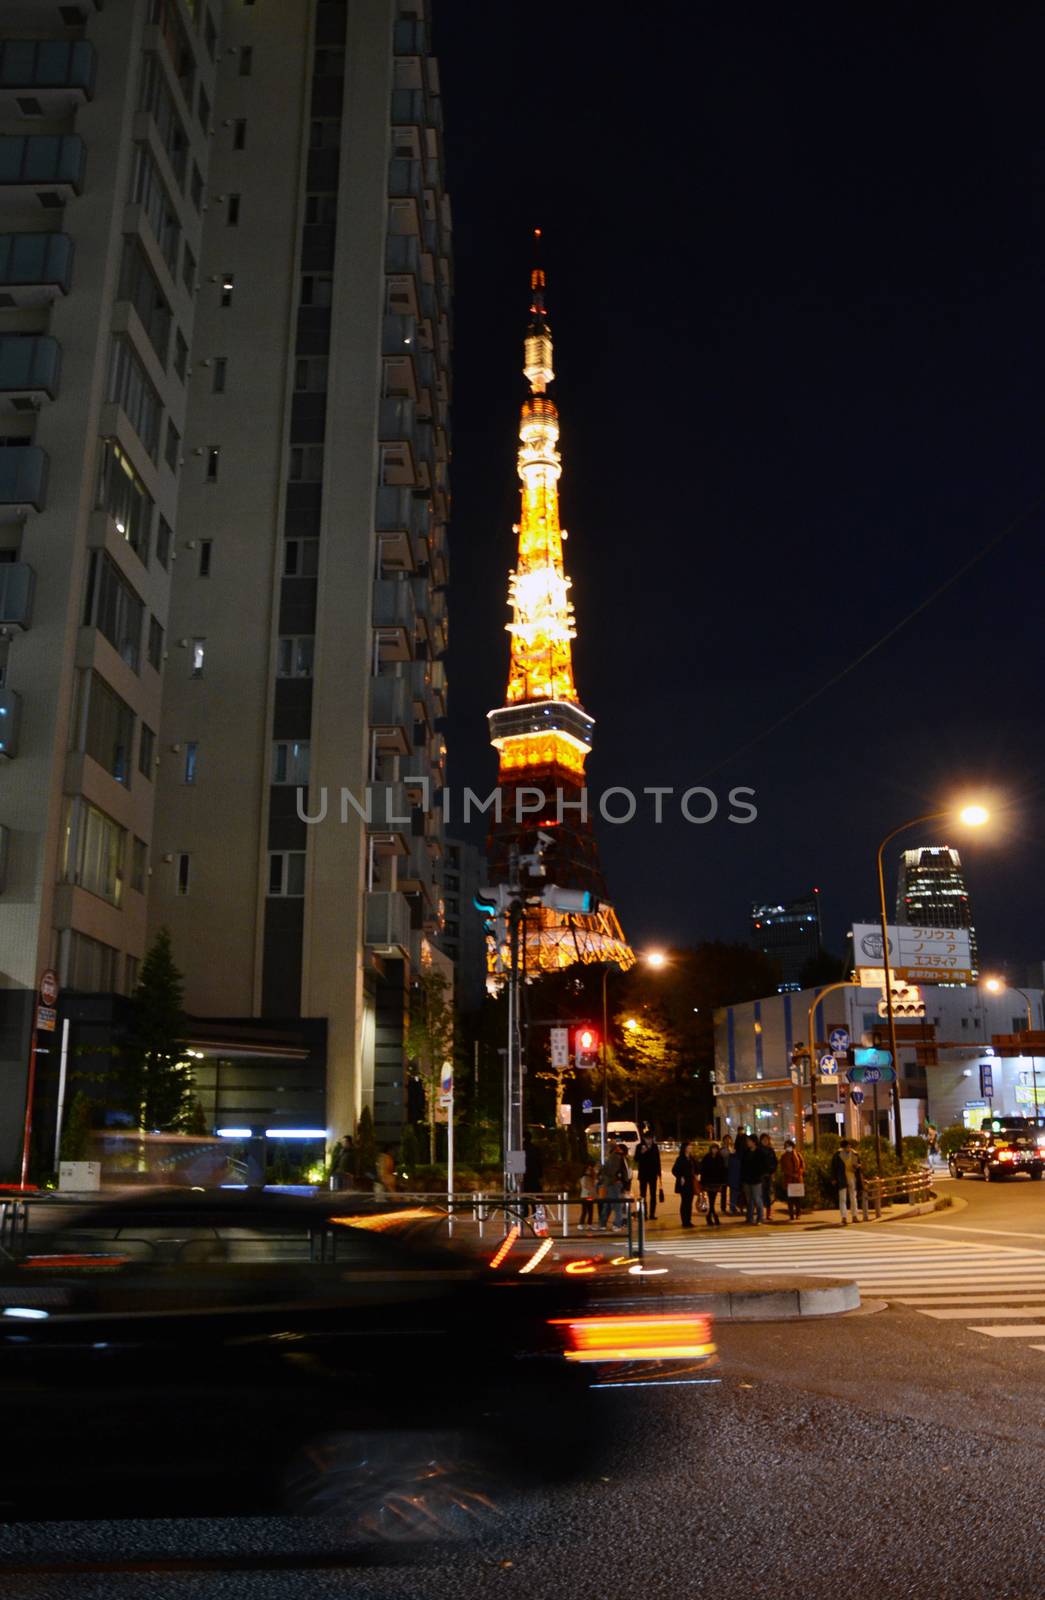 Tokyo, Japan - November 28, 2013: View of busy street at night with Tokyo Tower in the distance in Tokyo, Japan on November 28, 2013.